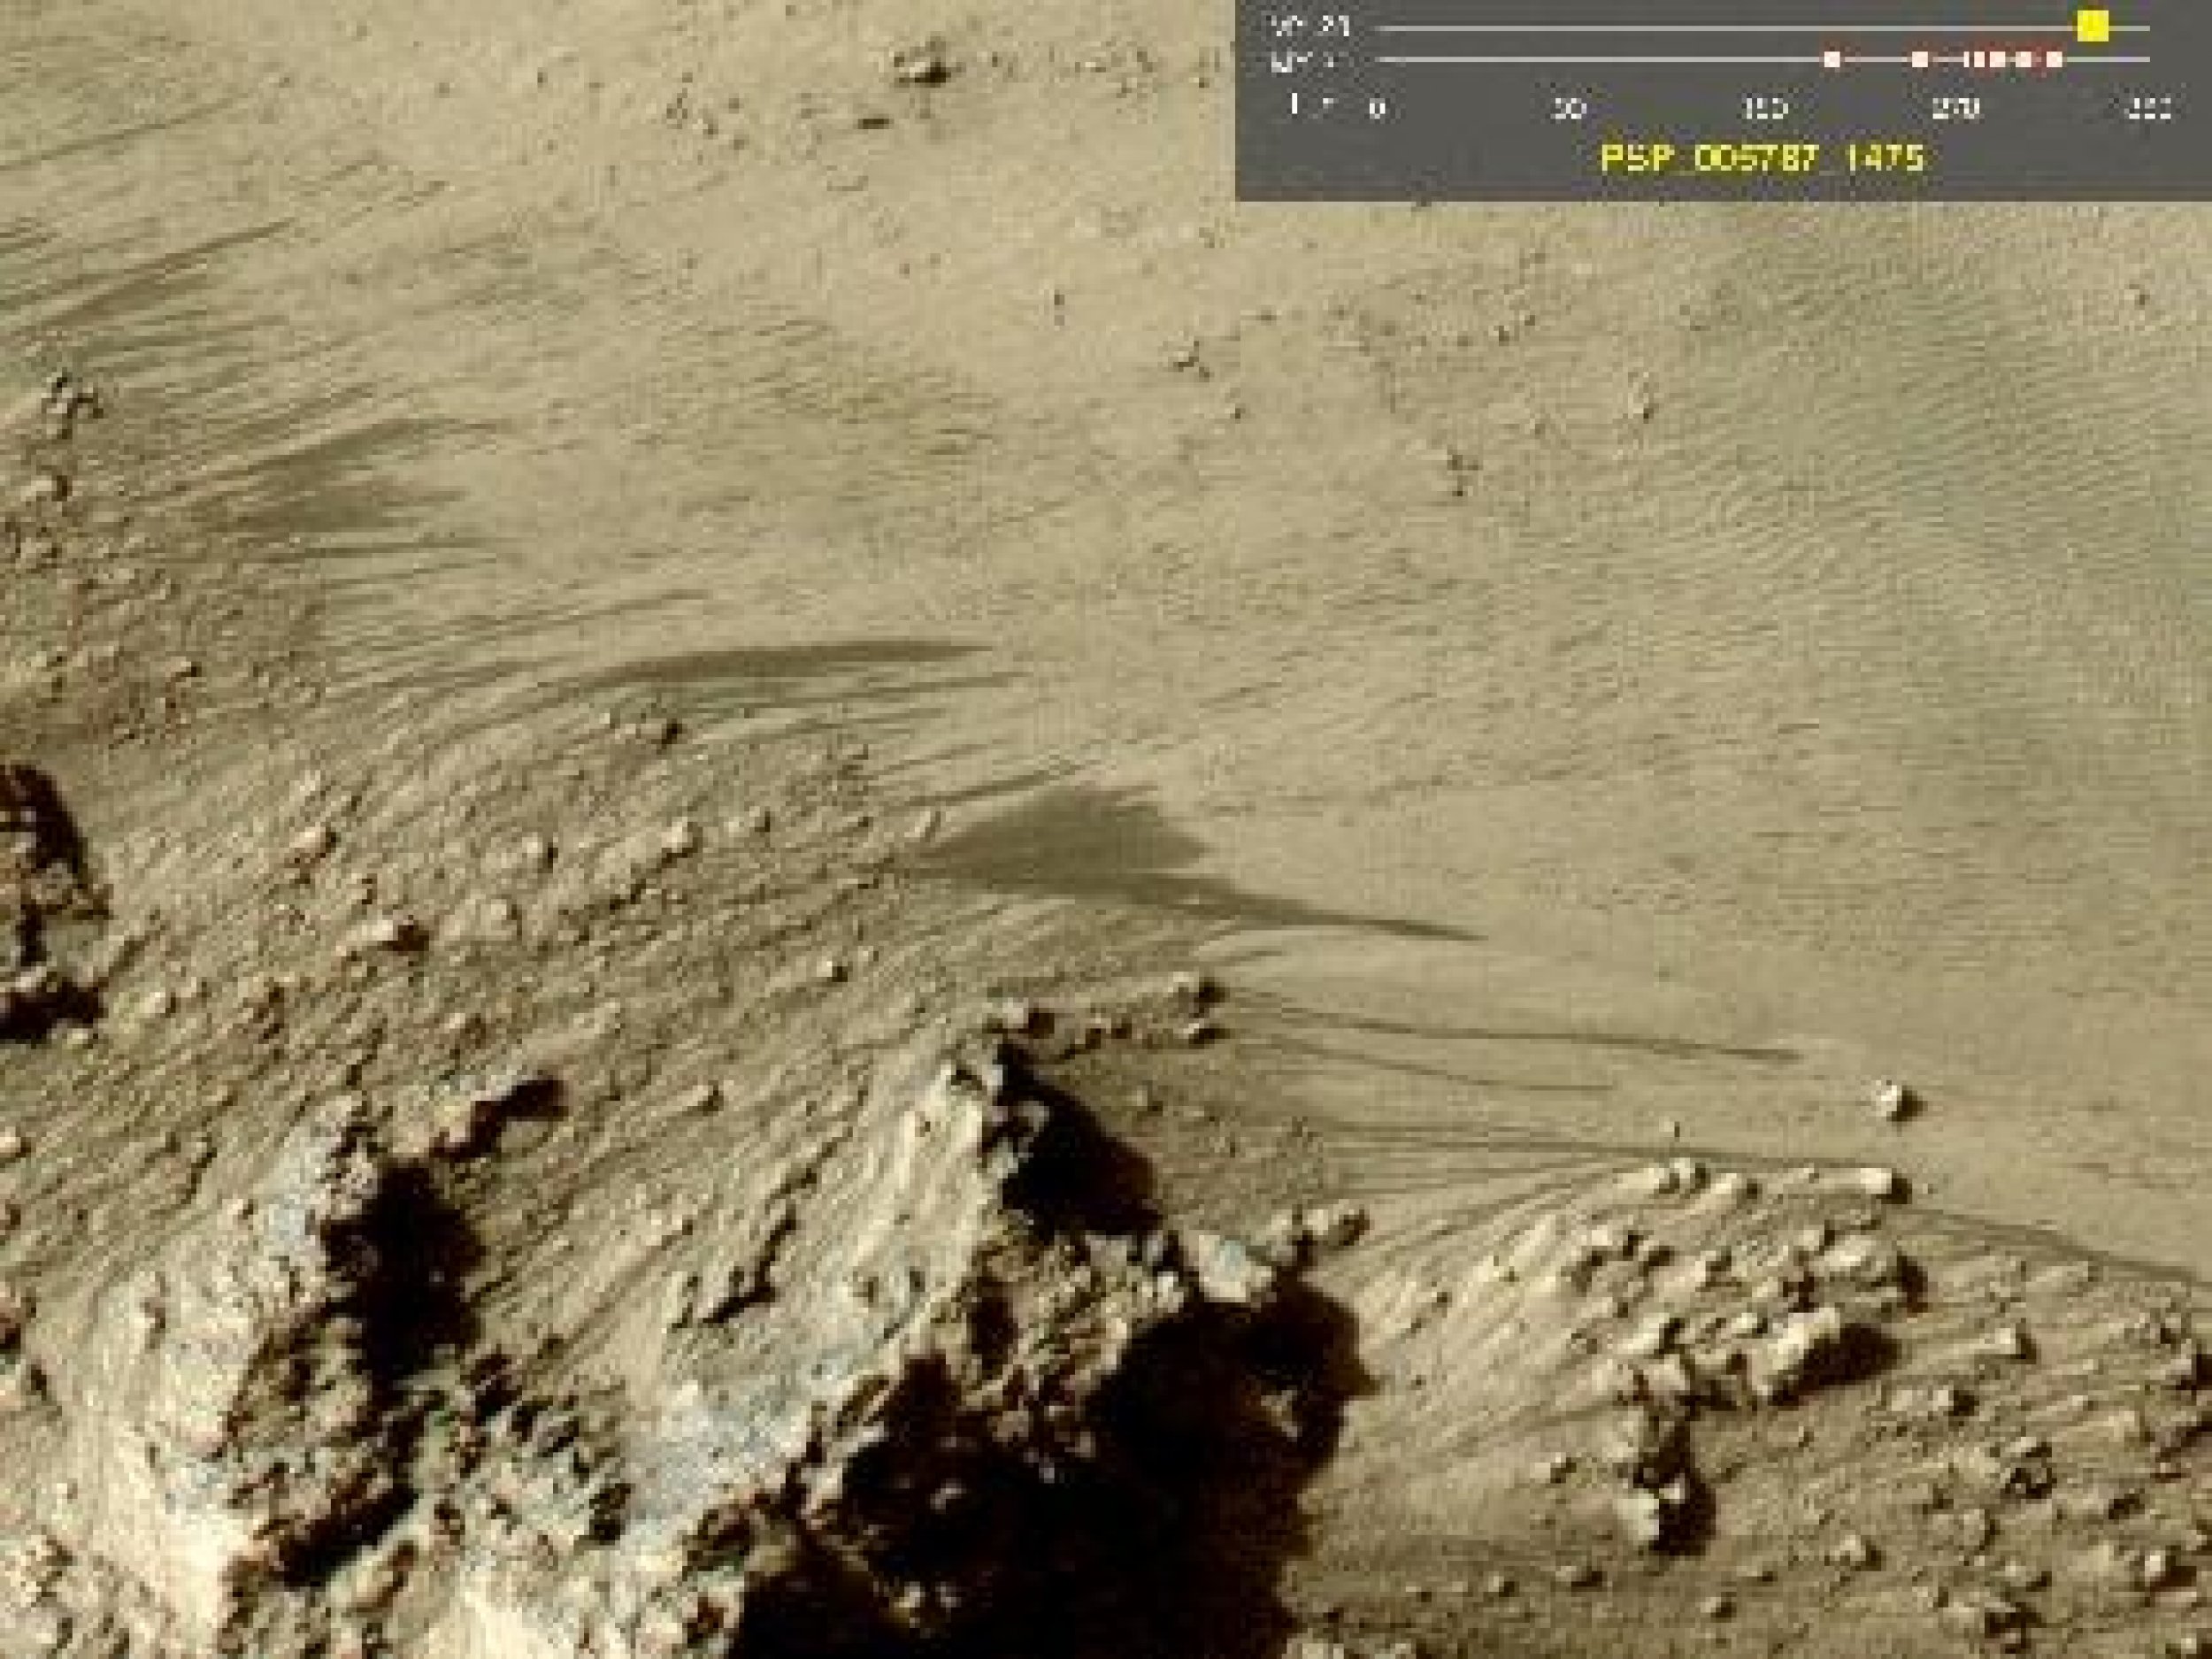 Warm-Season Flows on Slope in Horowitz Crater Eight-Image Sequence